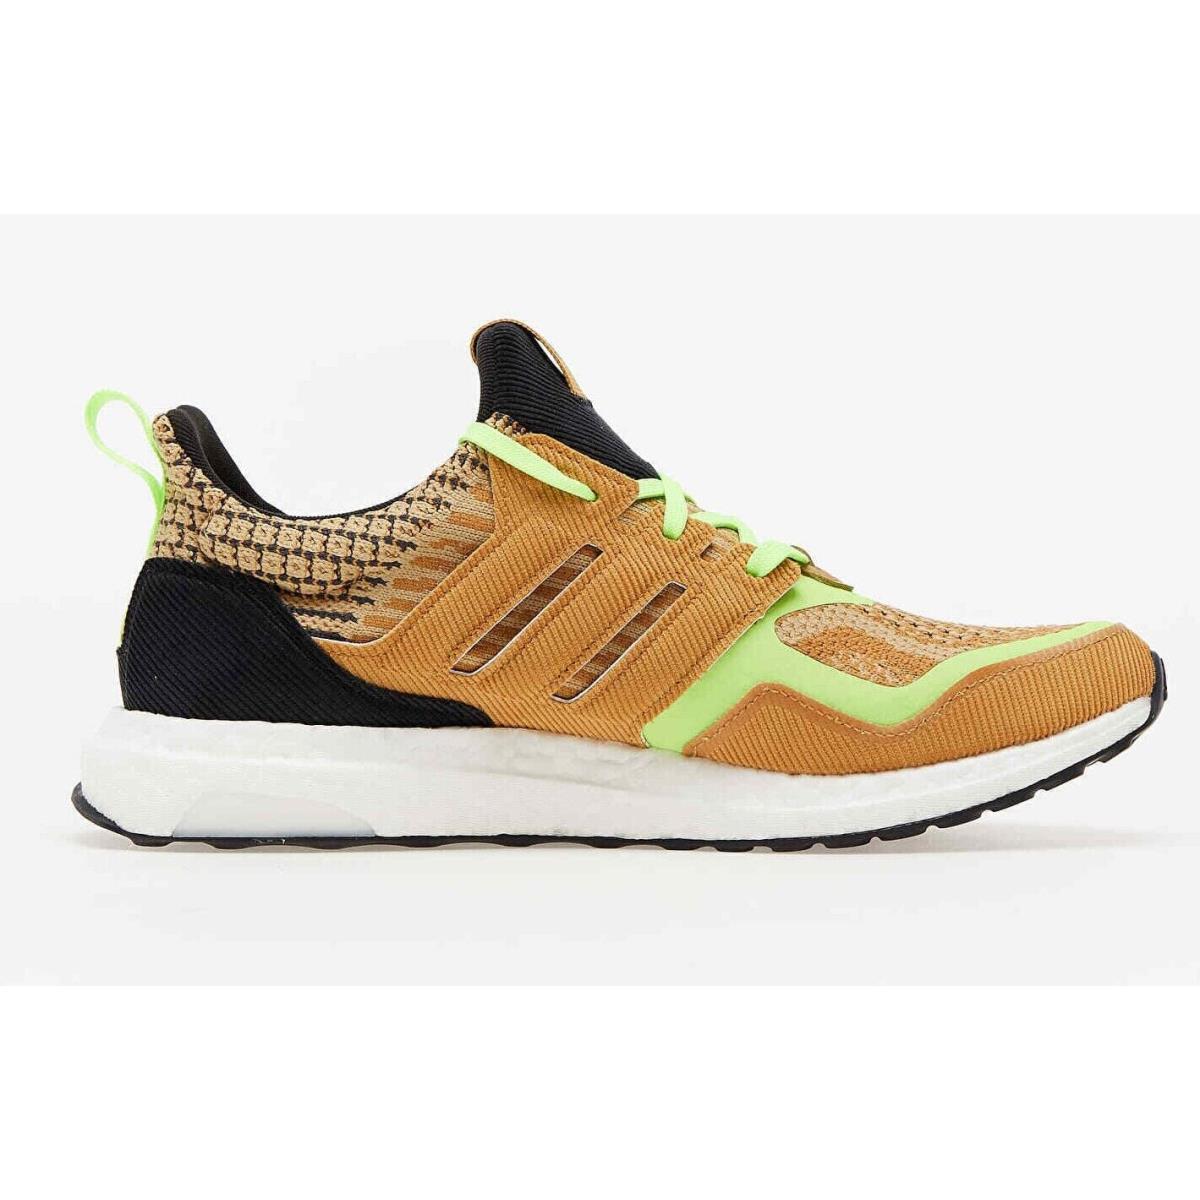 Adidas shoes UltraBoost DNA - Multicolor 0